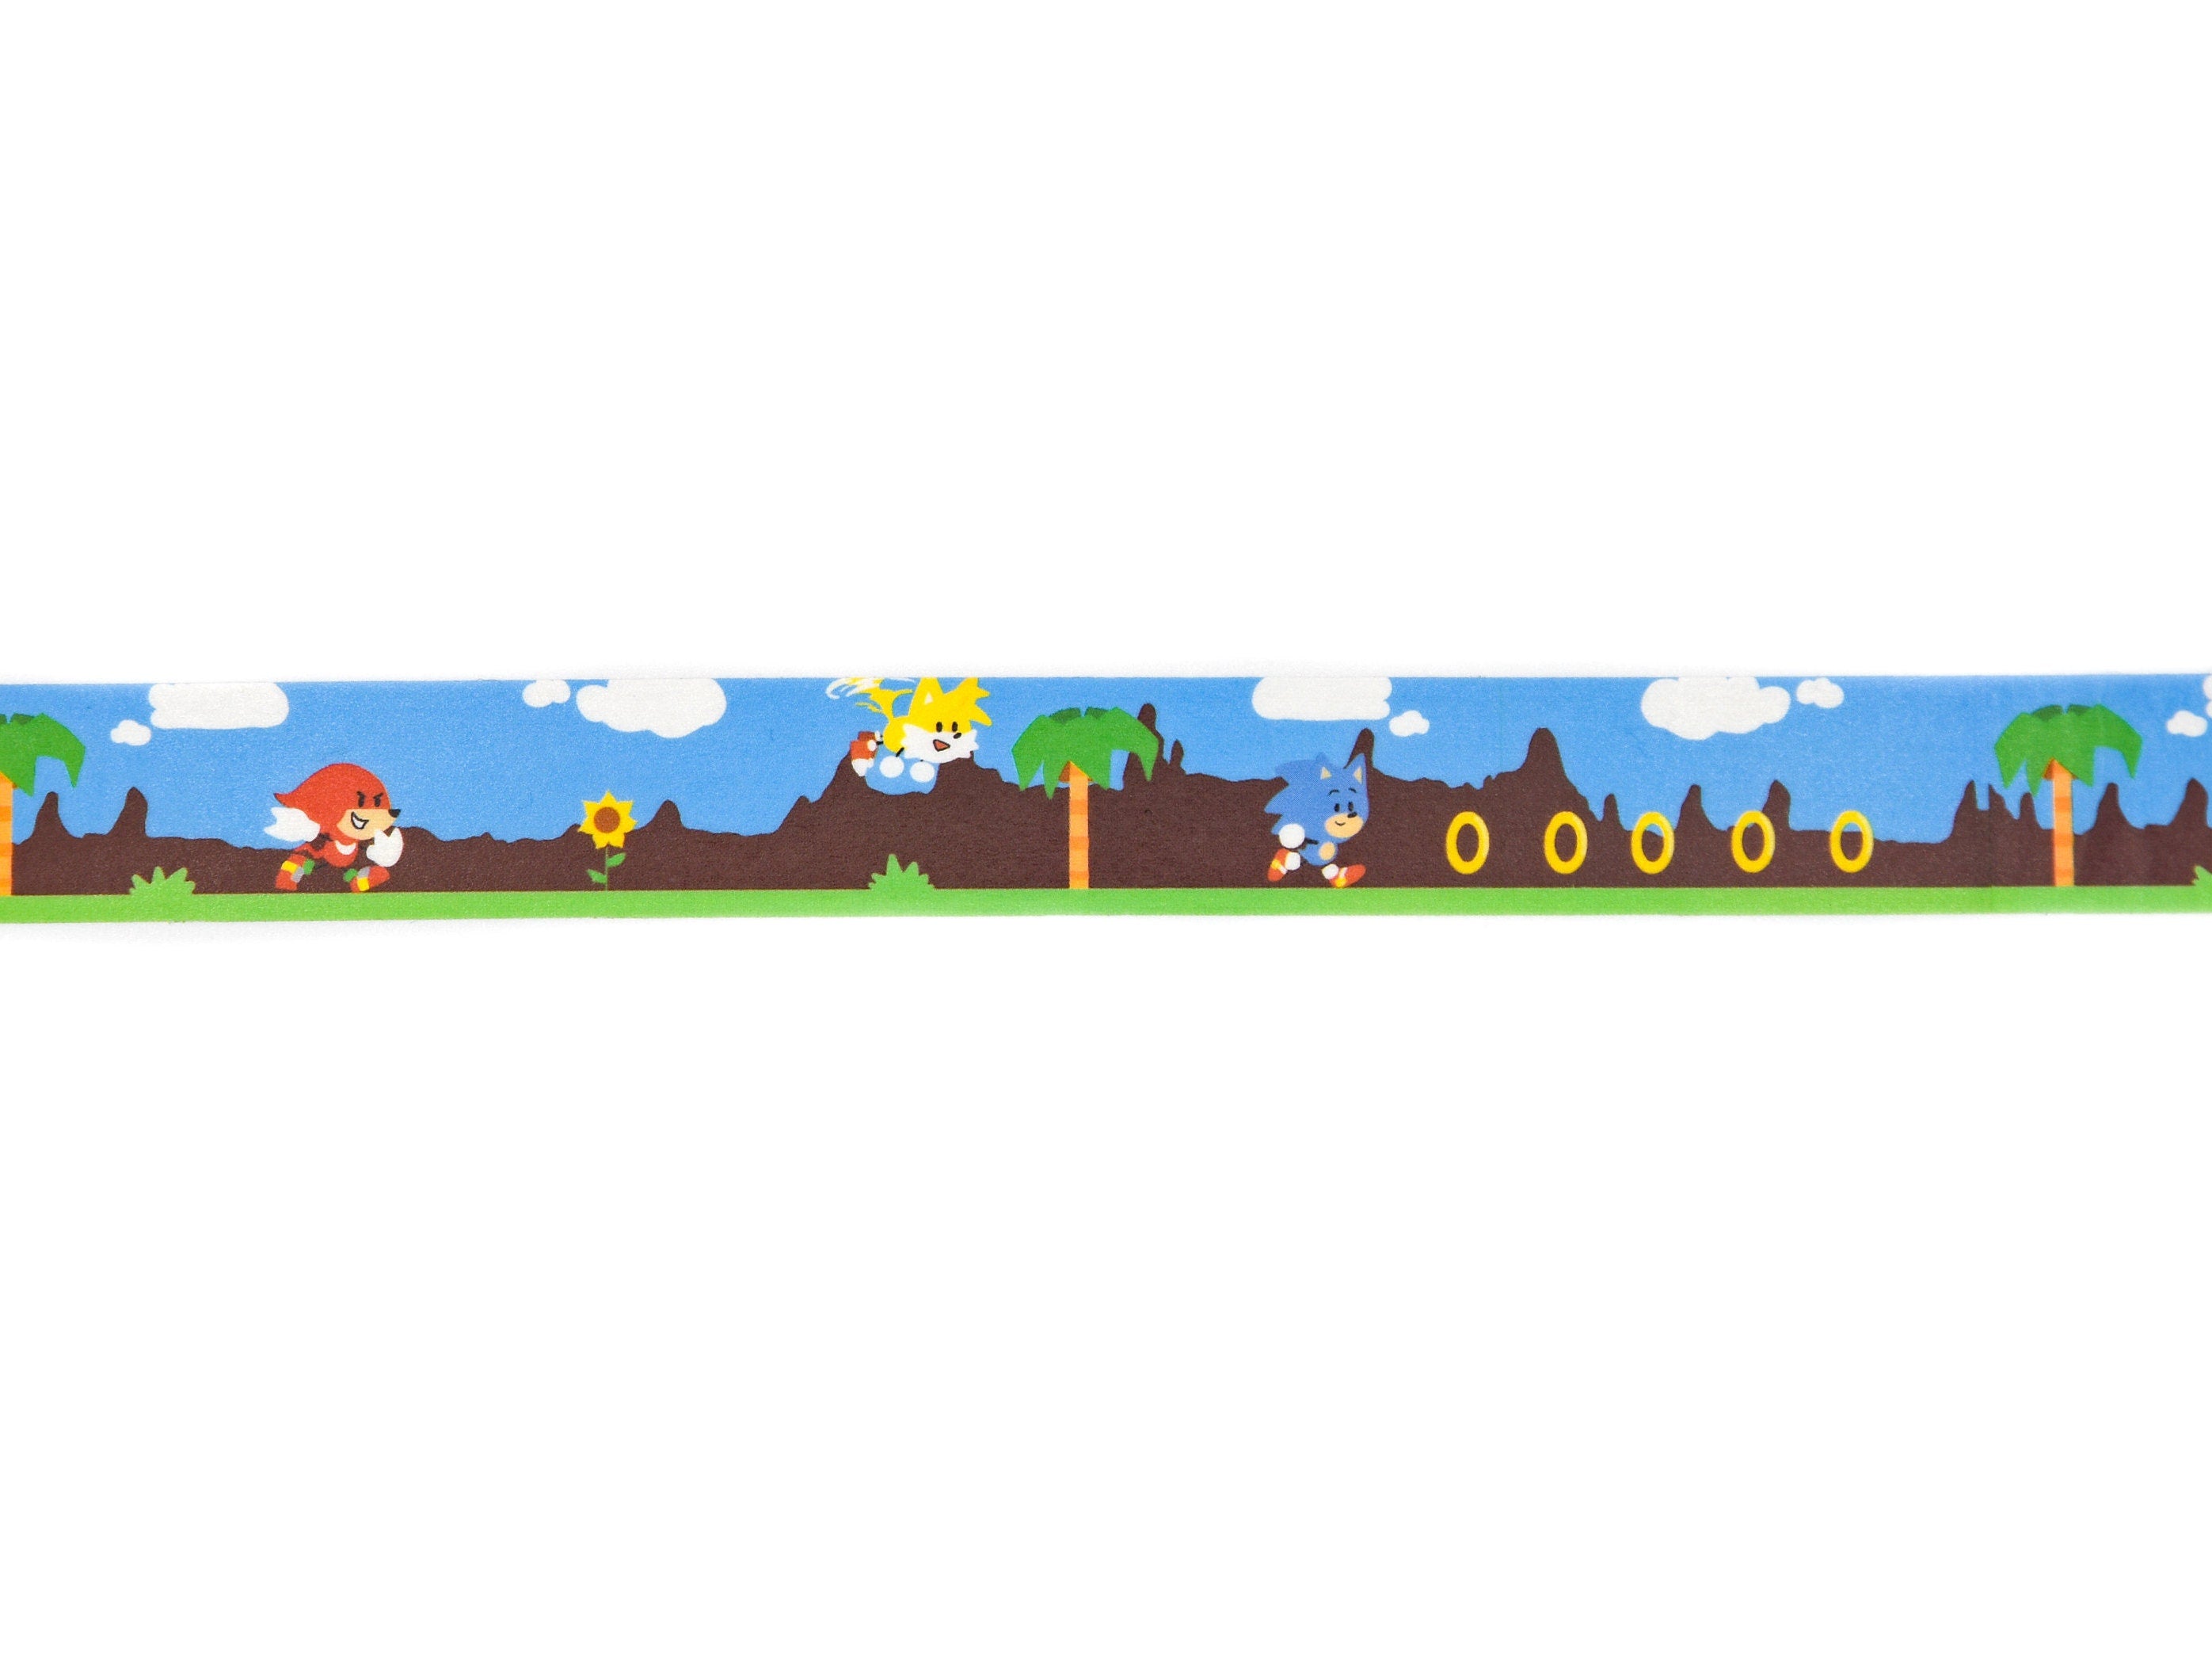 Sonic and Tails Washi Tape & Knuckles